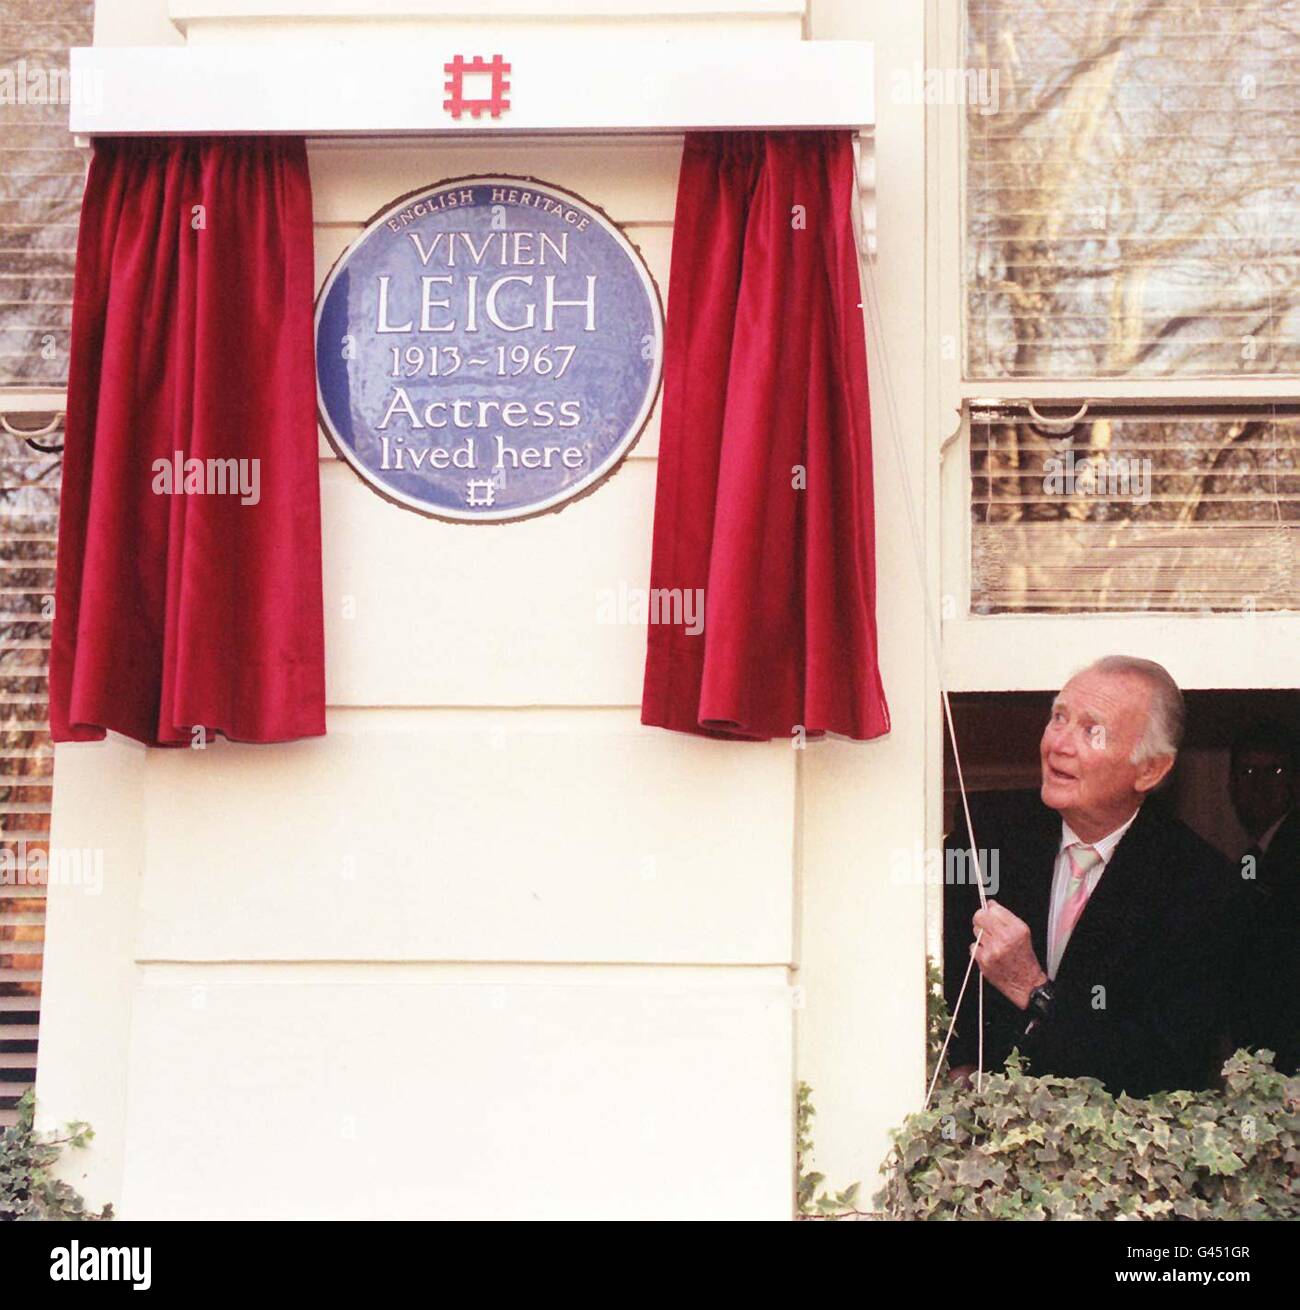 Sir John Mills unveils a special plaque to actress Vivien Leigh, famous for her role as Scarlett O'Hara in Gone with the Wind, at 54 Eaton Square, London, today (Weds) where she lived for nine years from 1958 until her death aged 53. See PA Story SHOWBIZ Leigh. Photo by Fiona Hanson. Stock Photo